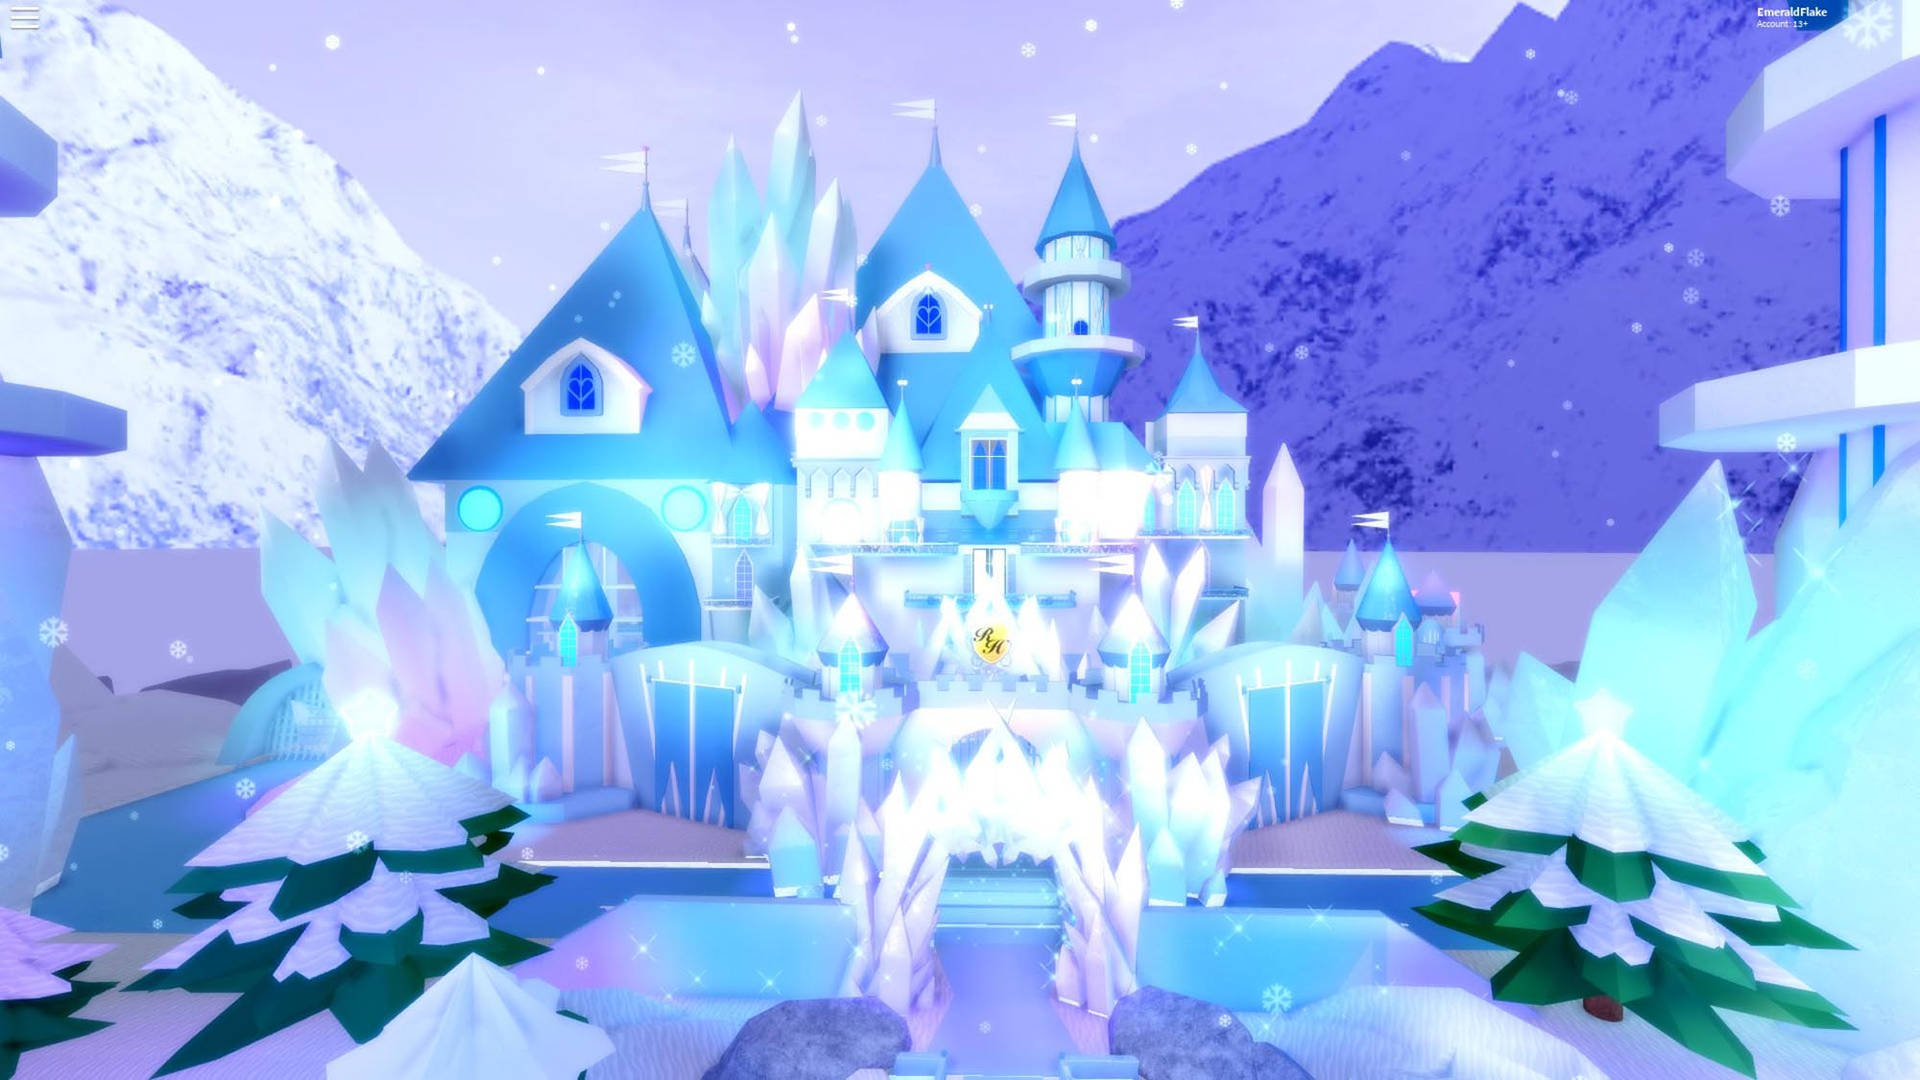 A Magical Evening at the Royale High Ice Castle Wallpaper